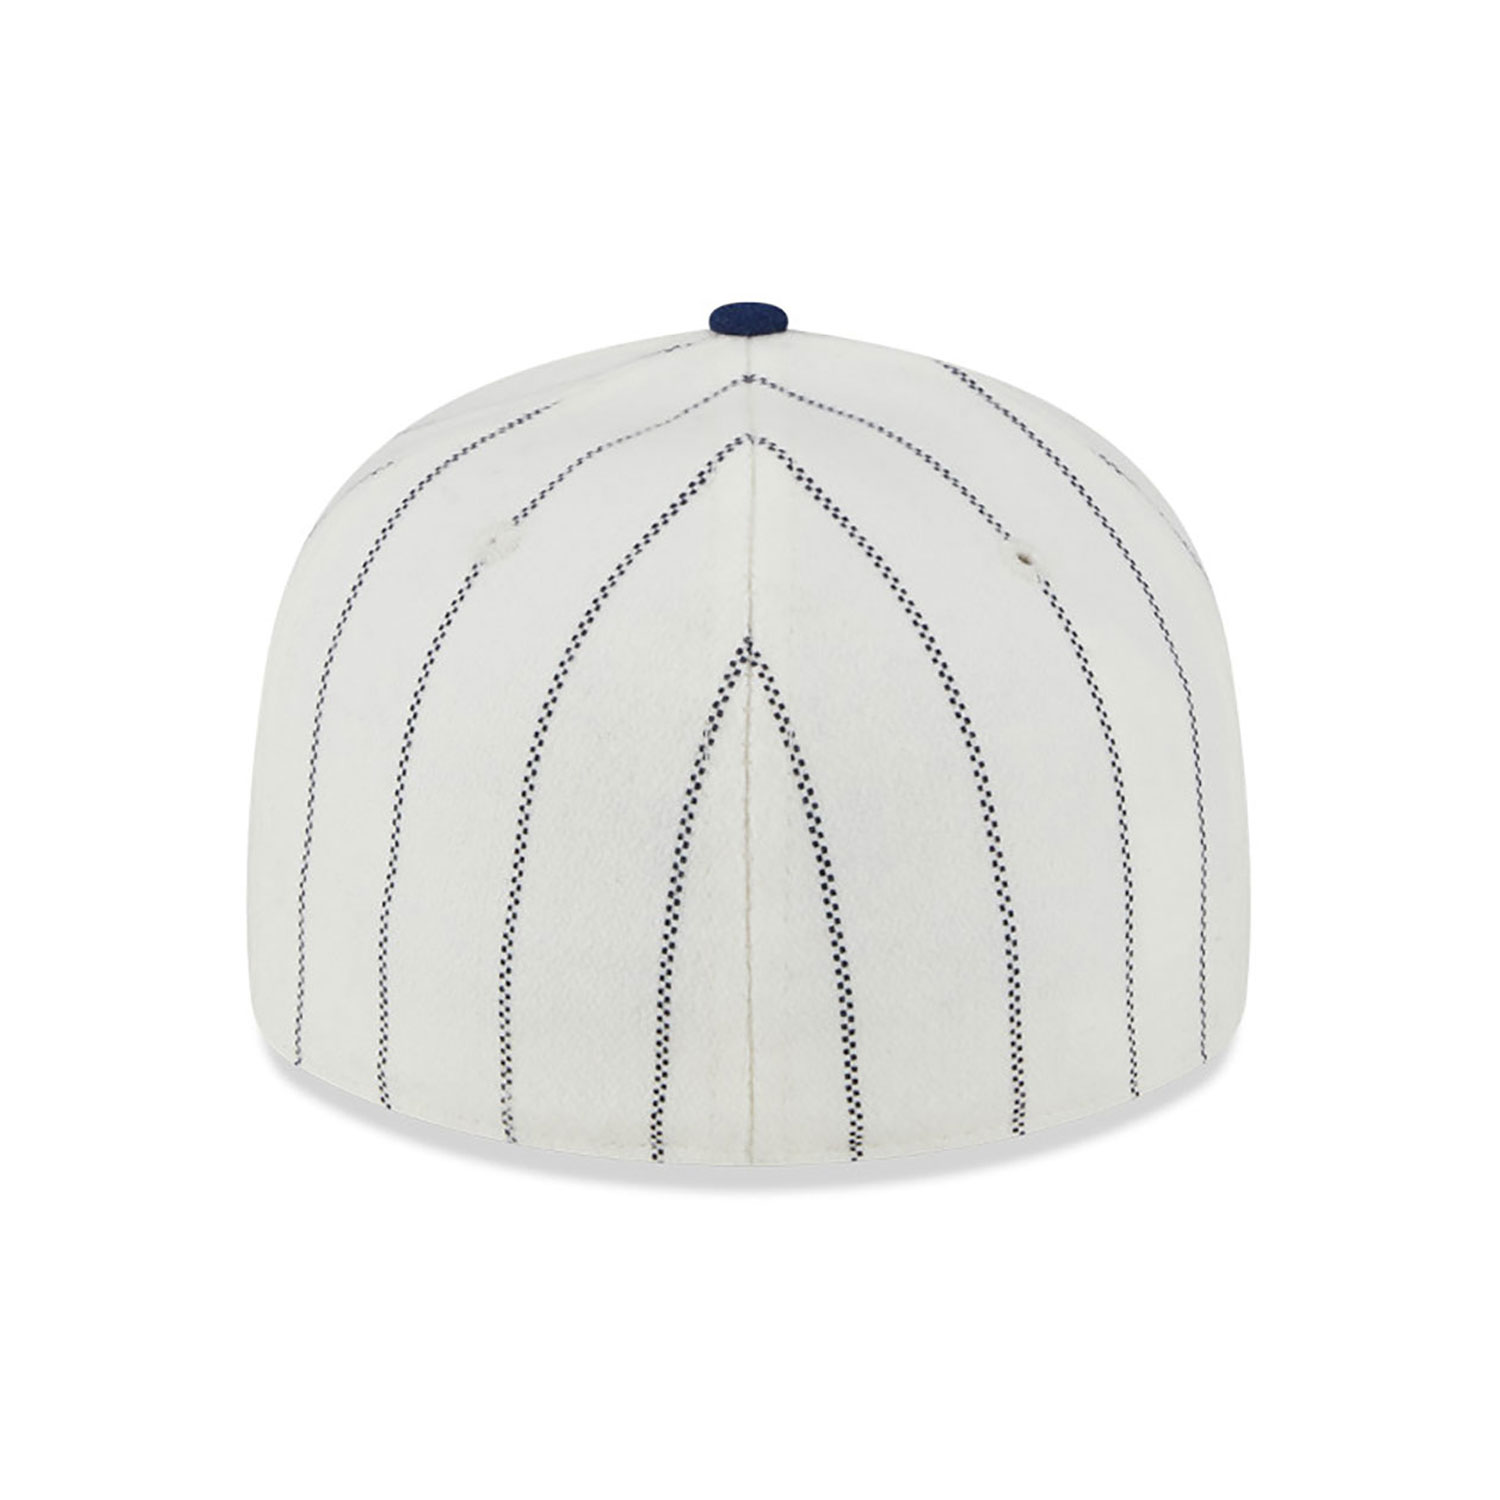 New York Yankees Cooperstown MLB Stripe Chrome White Retro Crown 59FIFTY Fitted Cap